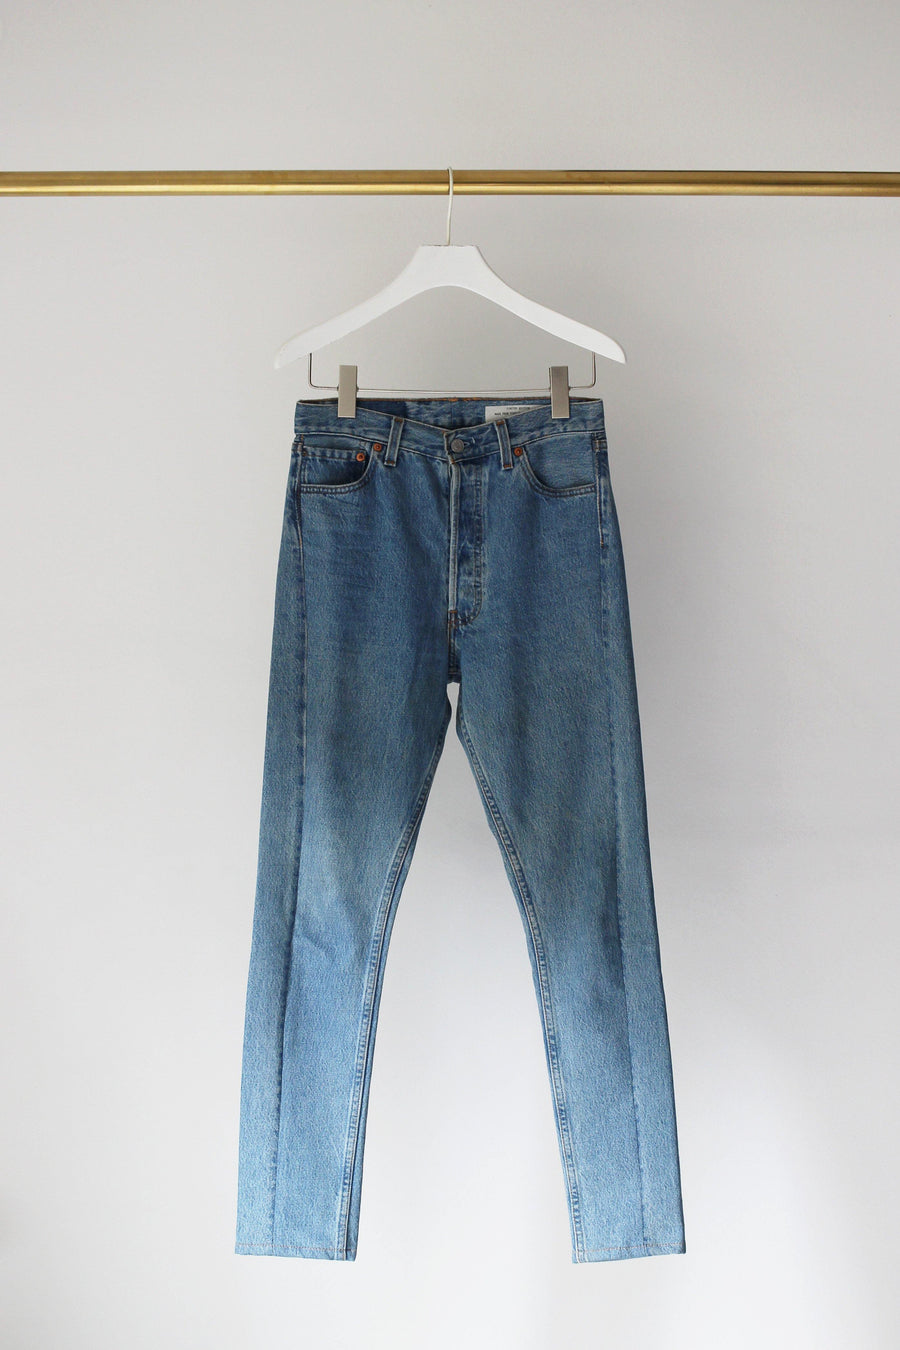 LEVIS 501 LIMITED EDITION - The Good Store Berlin